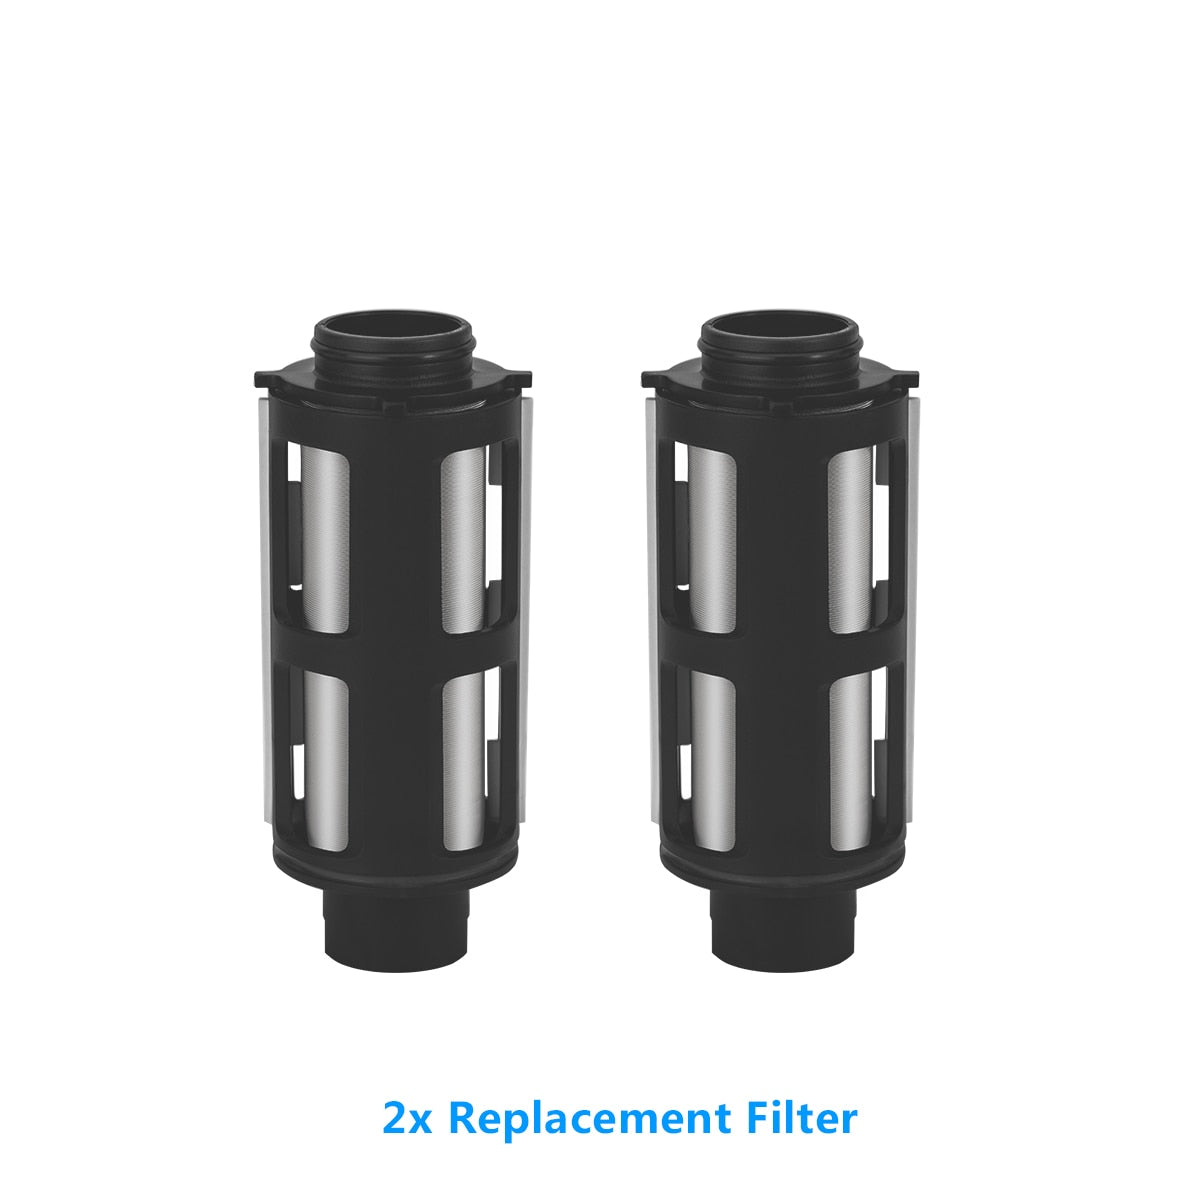 ALTHY Pre filter Whole House Spin Down Sediment Water Filter Central Prefilter Purifier System Backwash Stainless Steel Mesh 2xReplaceFilterChina Hardware > Plumbing > Water Dispensing & Filtration 159.99 EZYSELLA SHOP